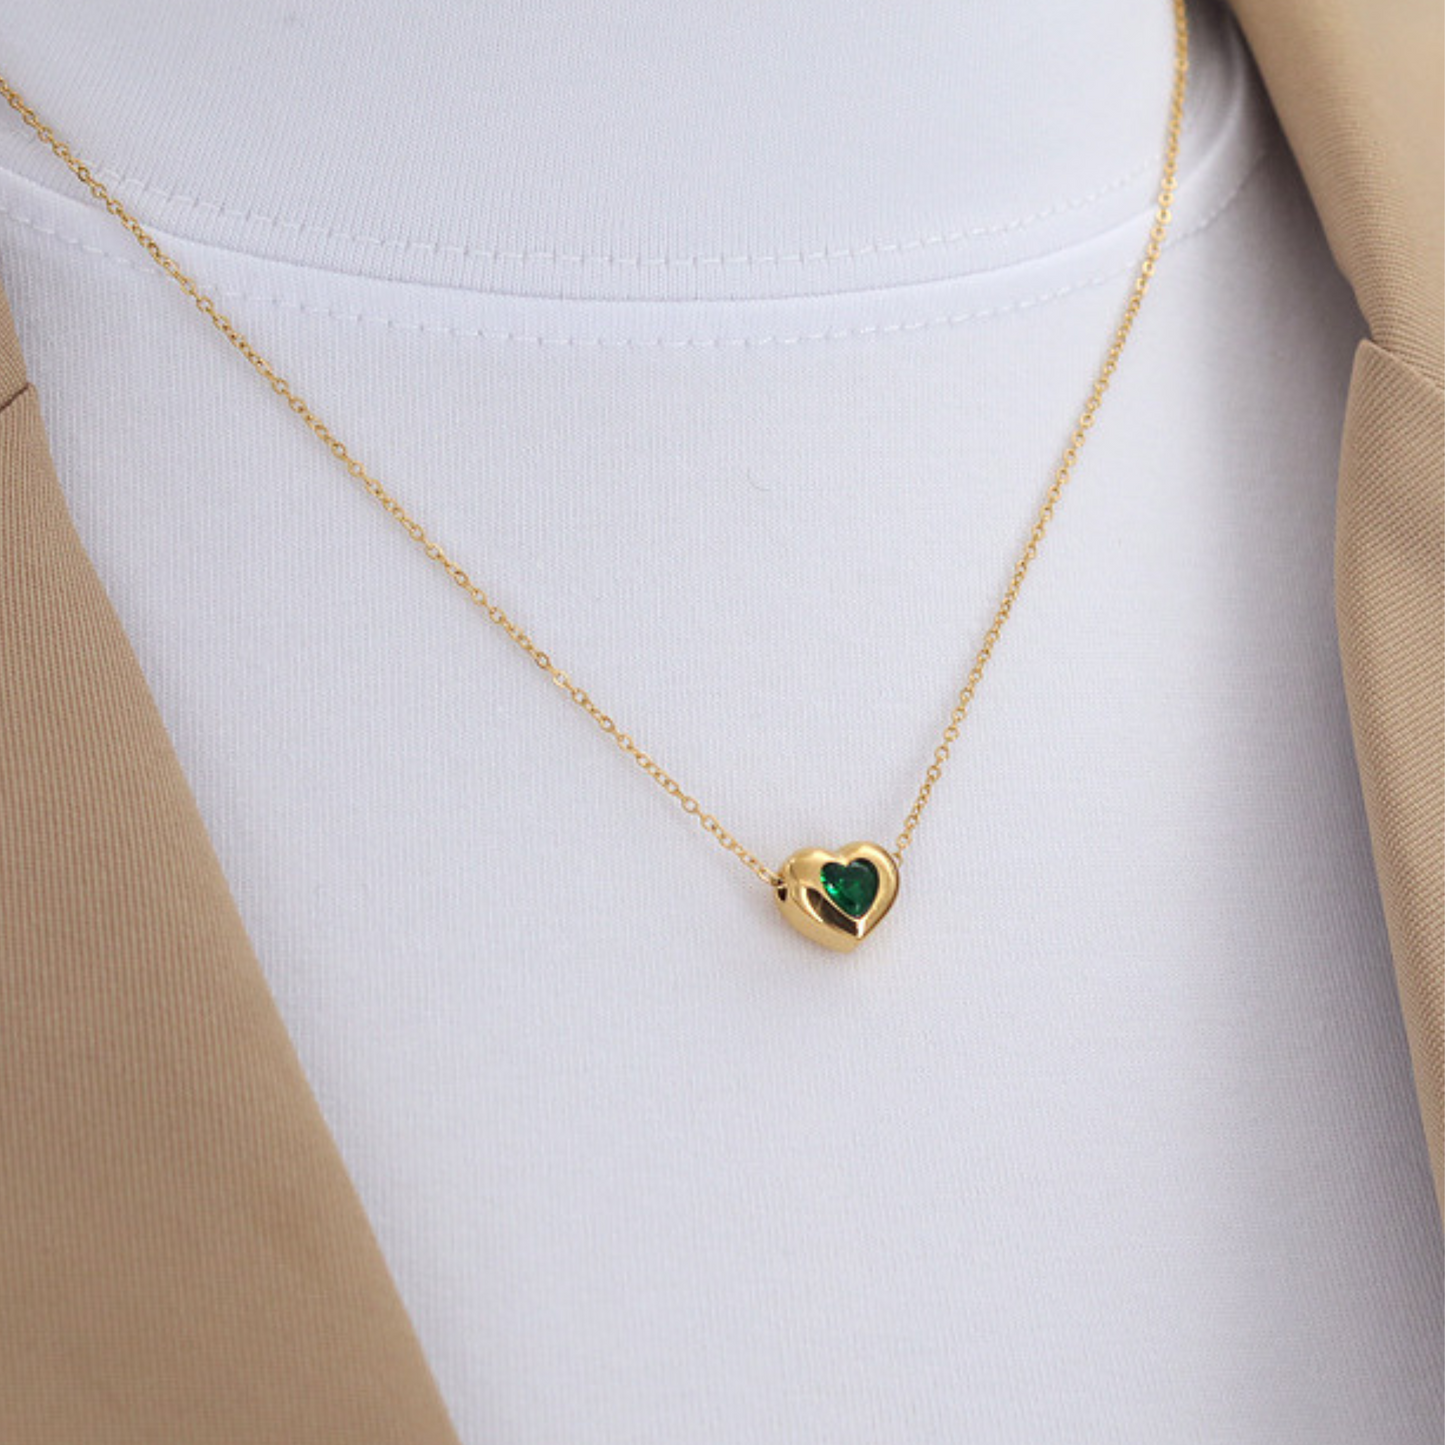 Minimalist Gold Heart Necklace for Women